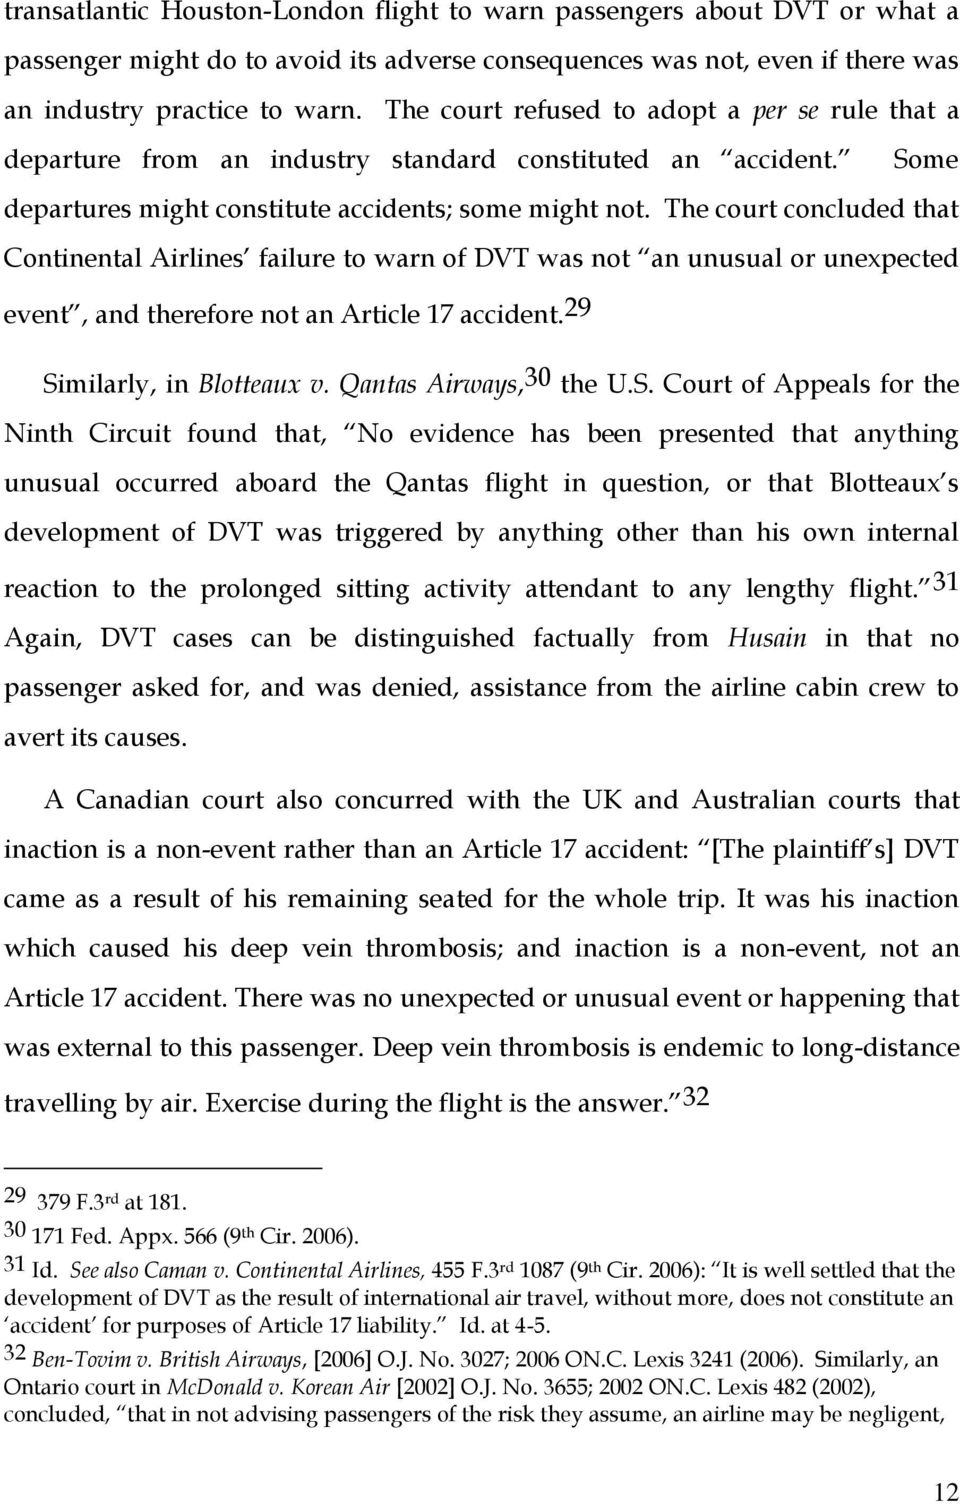 The court concluded that Continental Airlines failure to warn of DVT was not an unusual or unexpected event, and therefore not an Article 17 accident. 29 Similarly, in Blotteaux v.